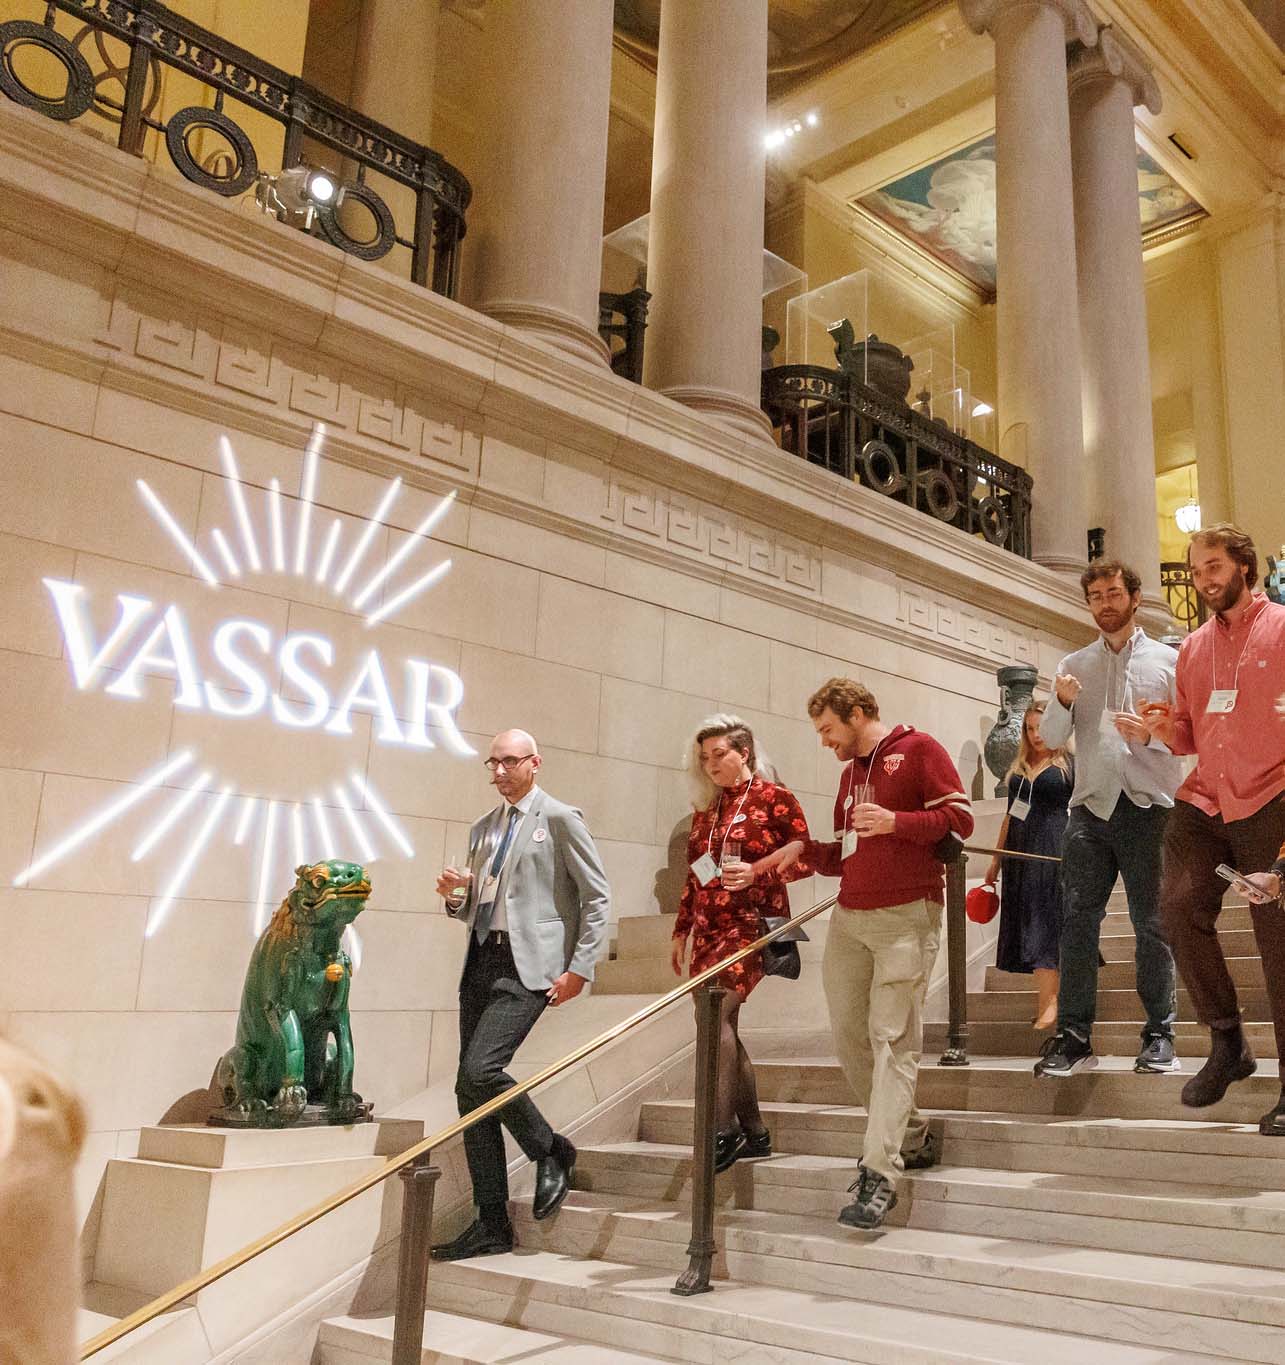 People walking down a large staircase in a museum with a projected image of a Vassar Fearlessly Consequential campaign logo project on a wall.